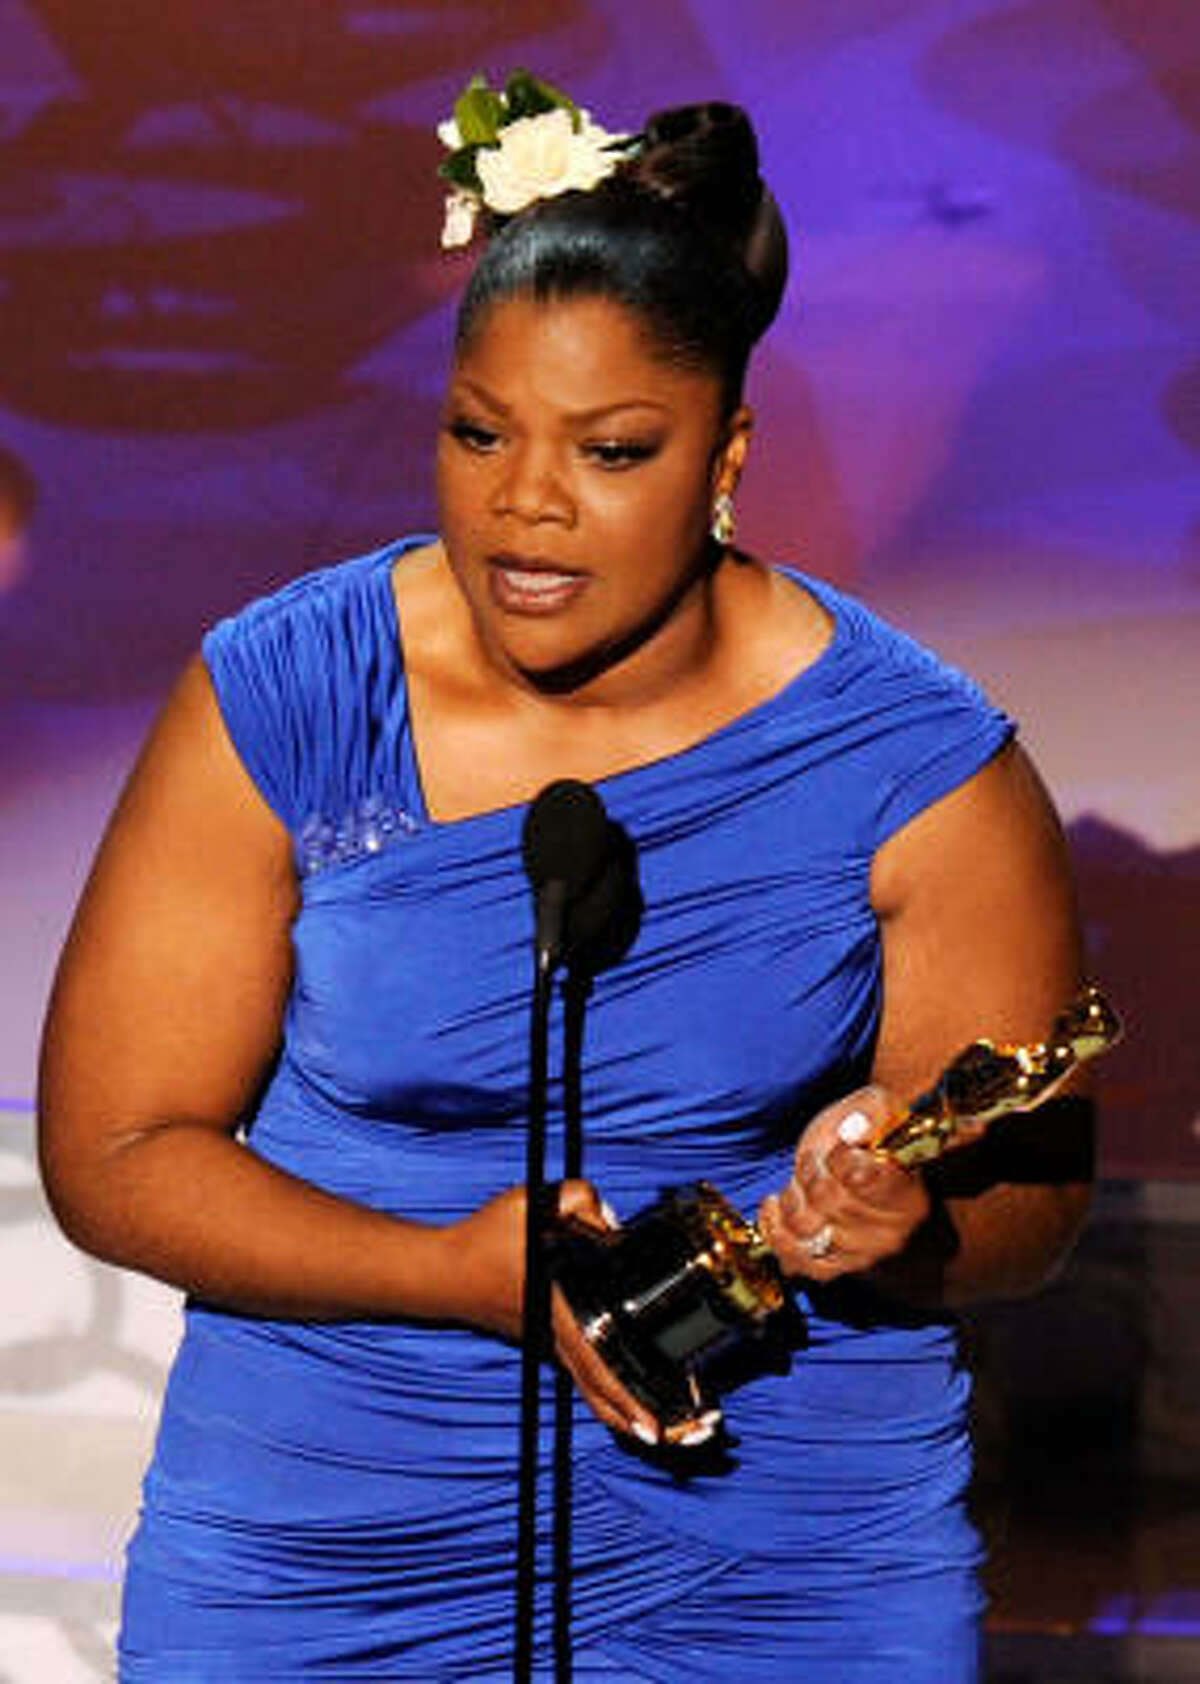 Awk-waaard: Mo'Nique acceptance speech included a thank you to her husband for "showing me that sometimes you have to forgo doing what's popular in order to do what's right." A nod to recent revelations on her open marriage perhaps?